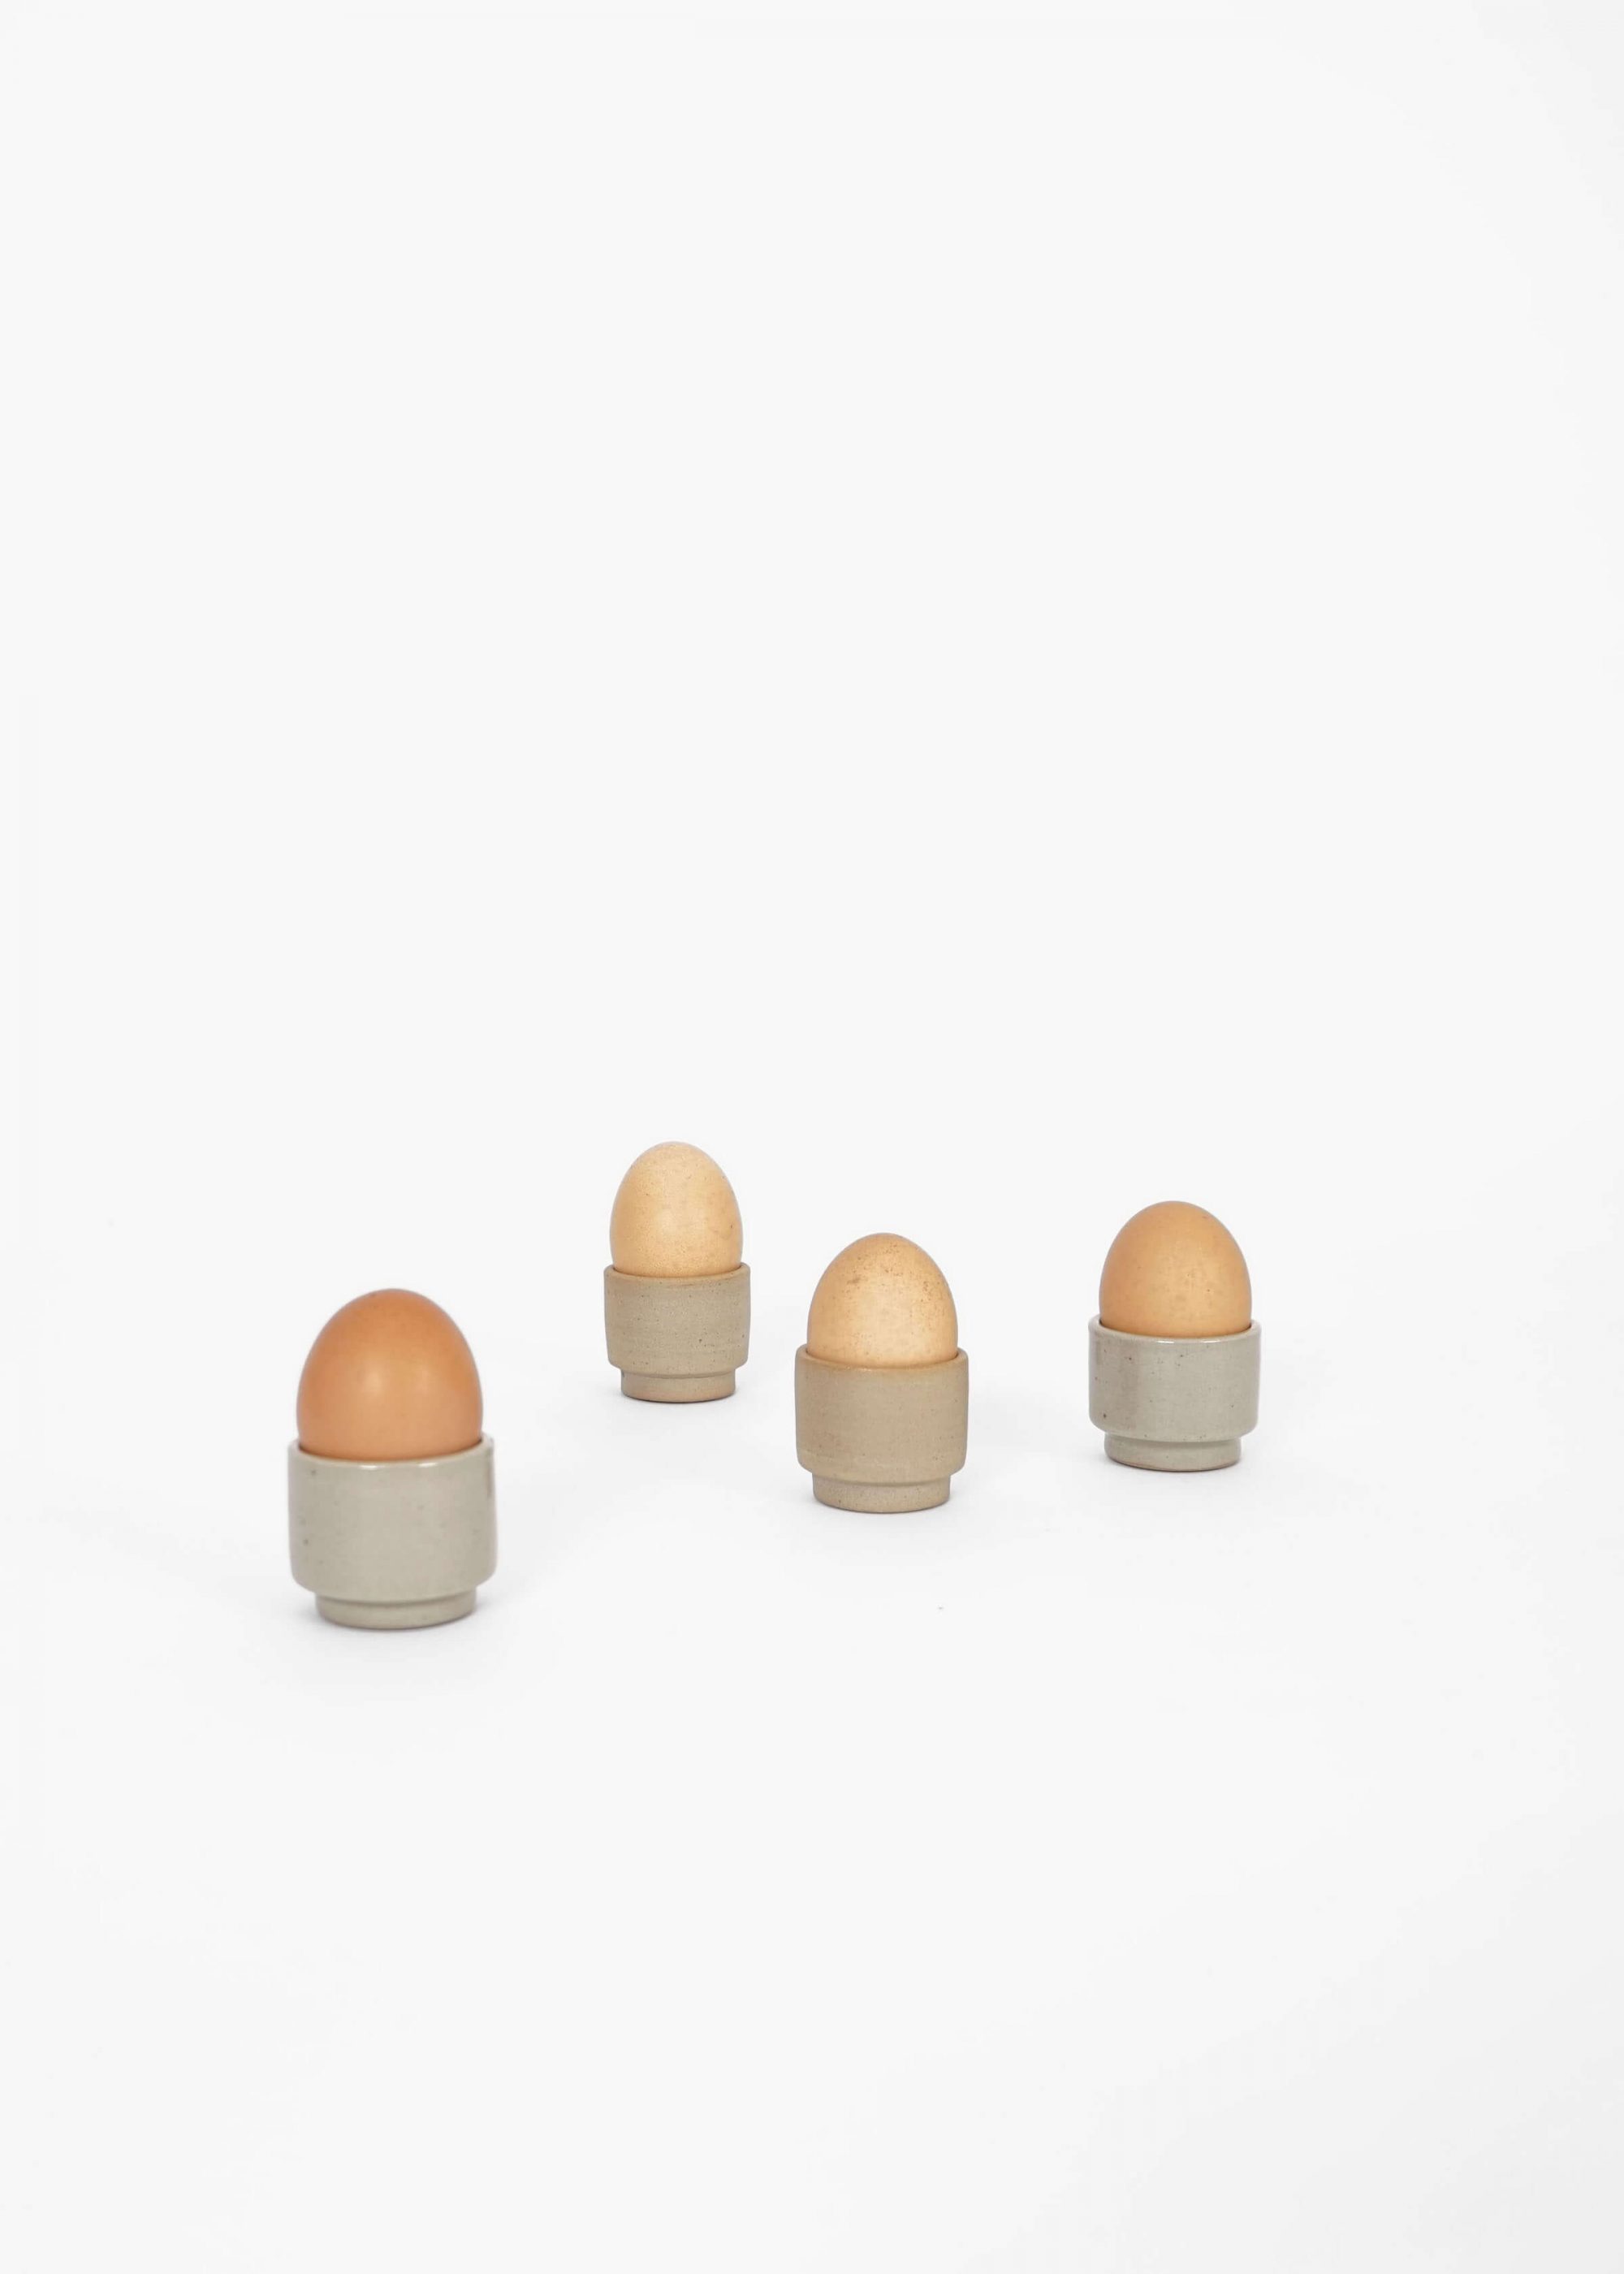 Product image for »Brutal & Beuys« Egg Cup 4-Set | Handmade Stoneware Ceramic